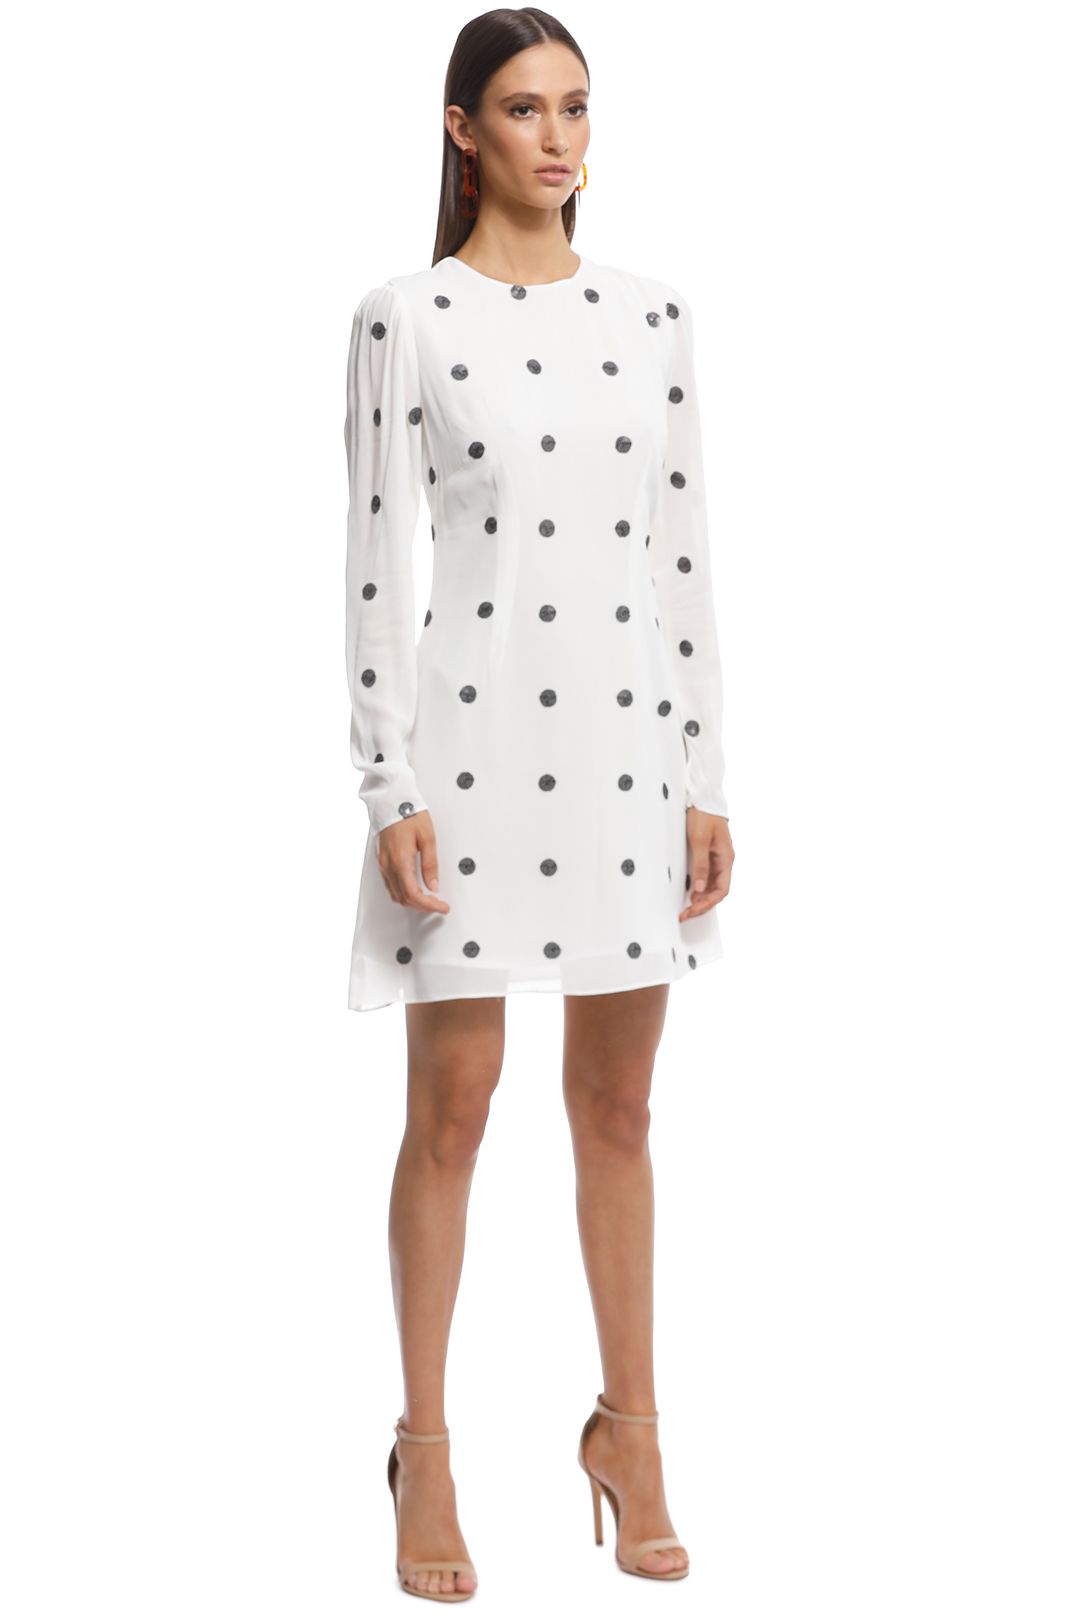 Talulah - Forget Me Not LS Mini Dress - Black and White - Side